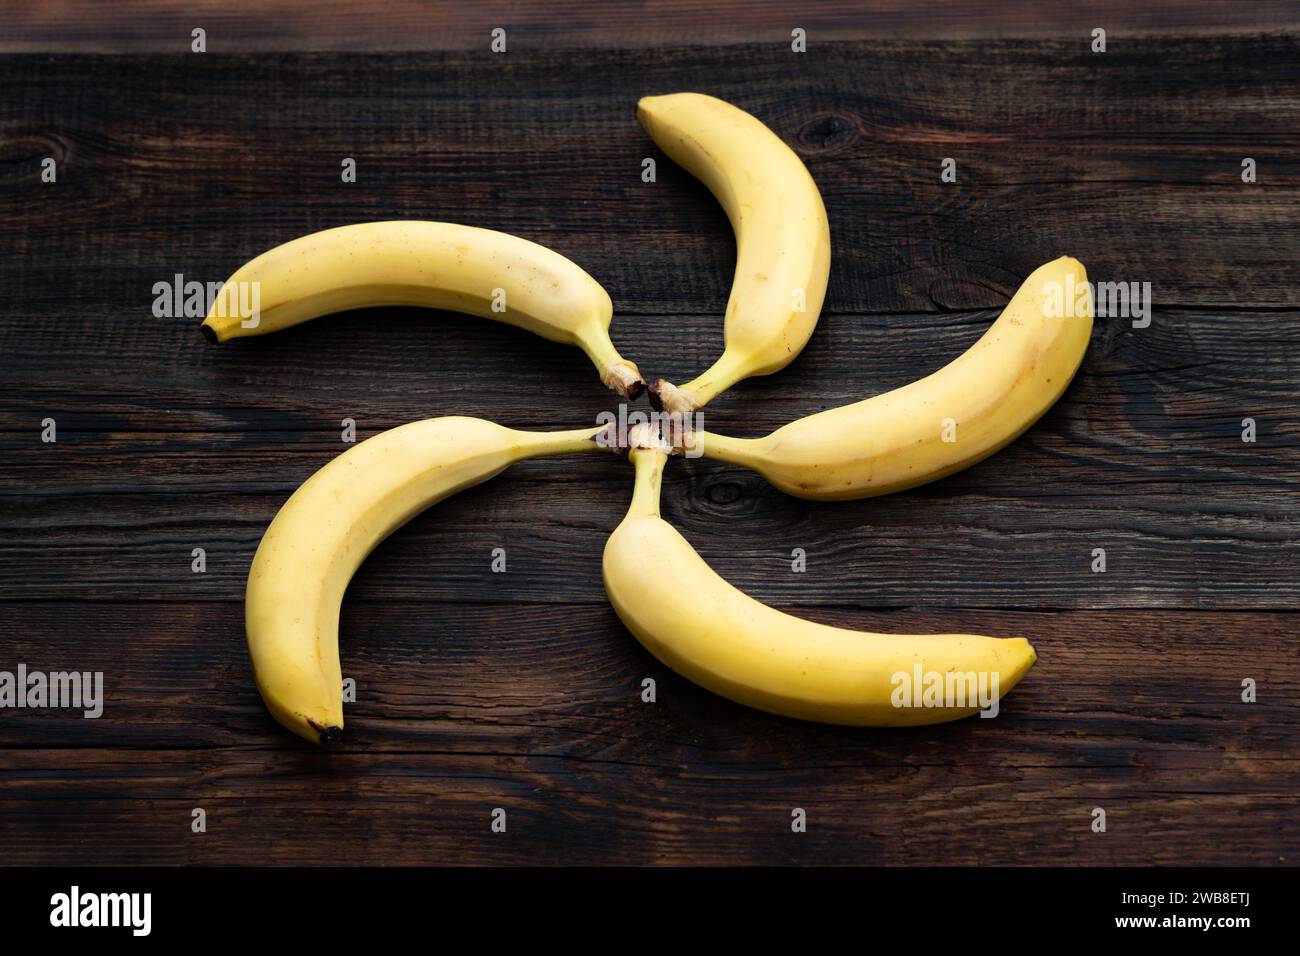 Bananas on a wooden table. a ripe yellow bunch of bananas on the kitchen table. view from above. bananas are stacked in the shape of the sun, circle Stock Photo